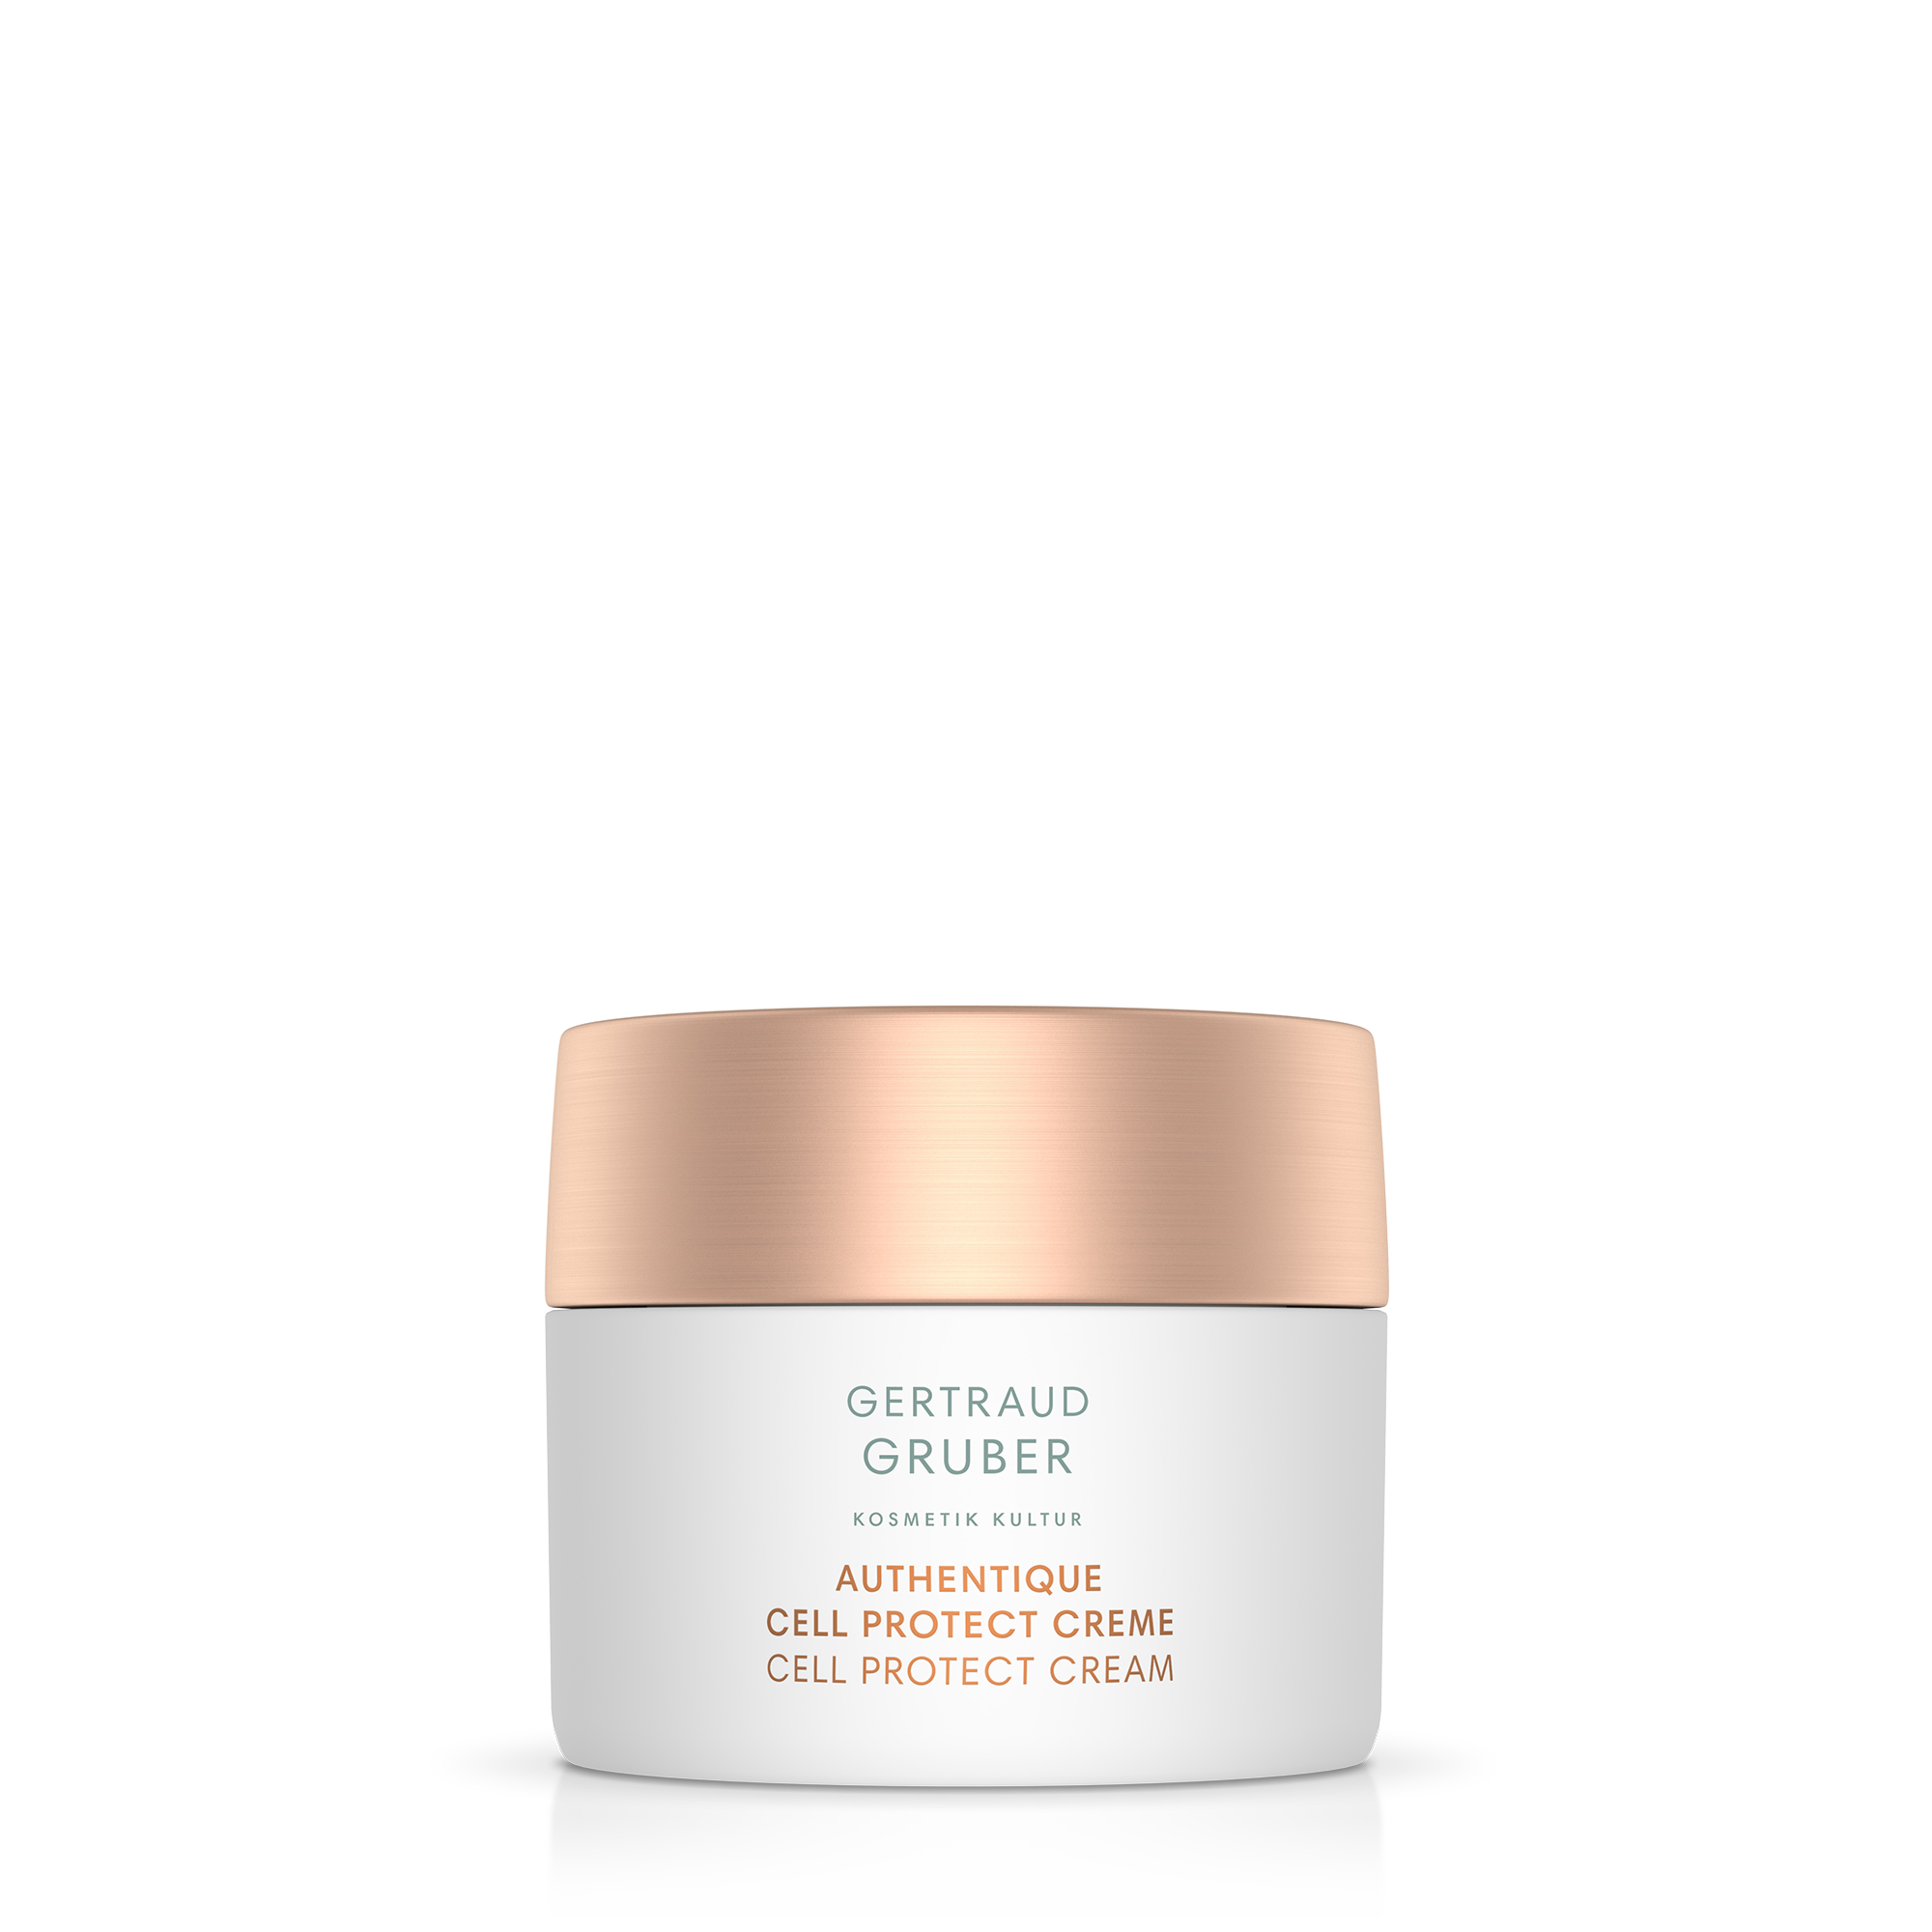 AUTHENTIQUE CELL PROTECT CREAM